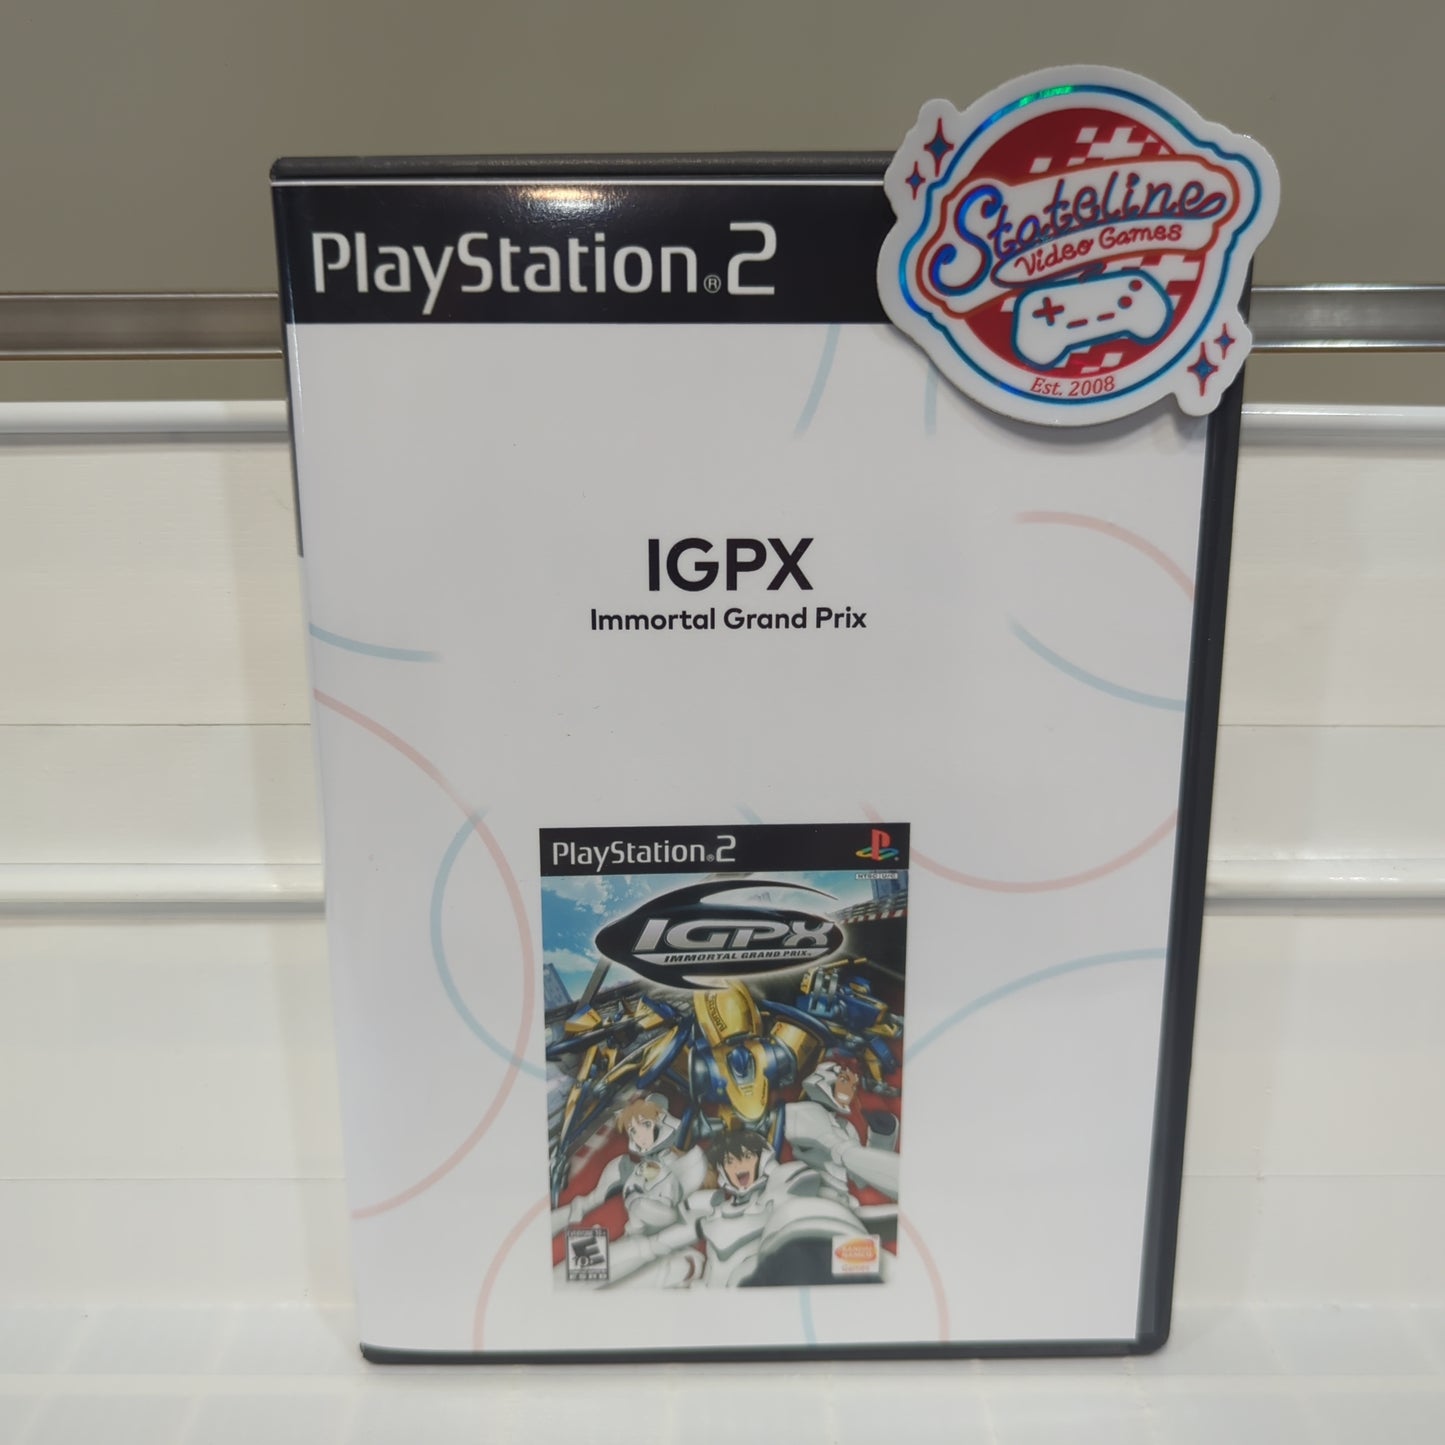 IGPX - Playstation 2